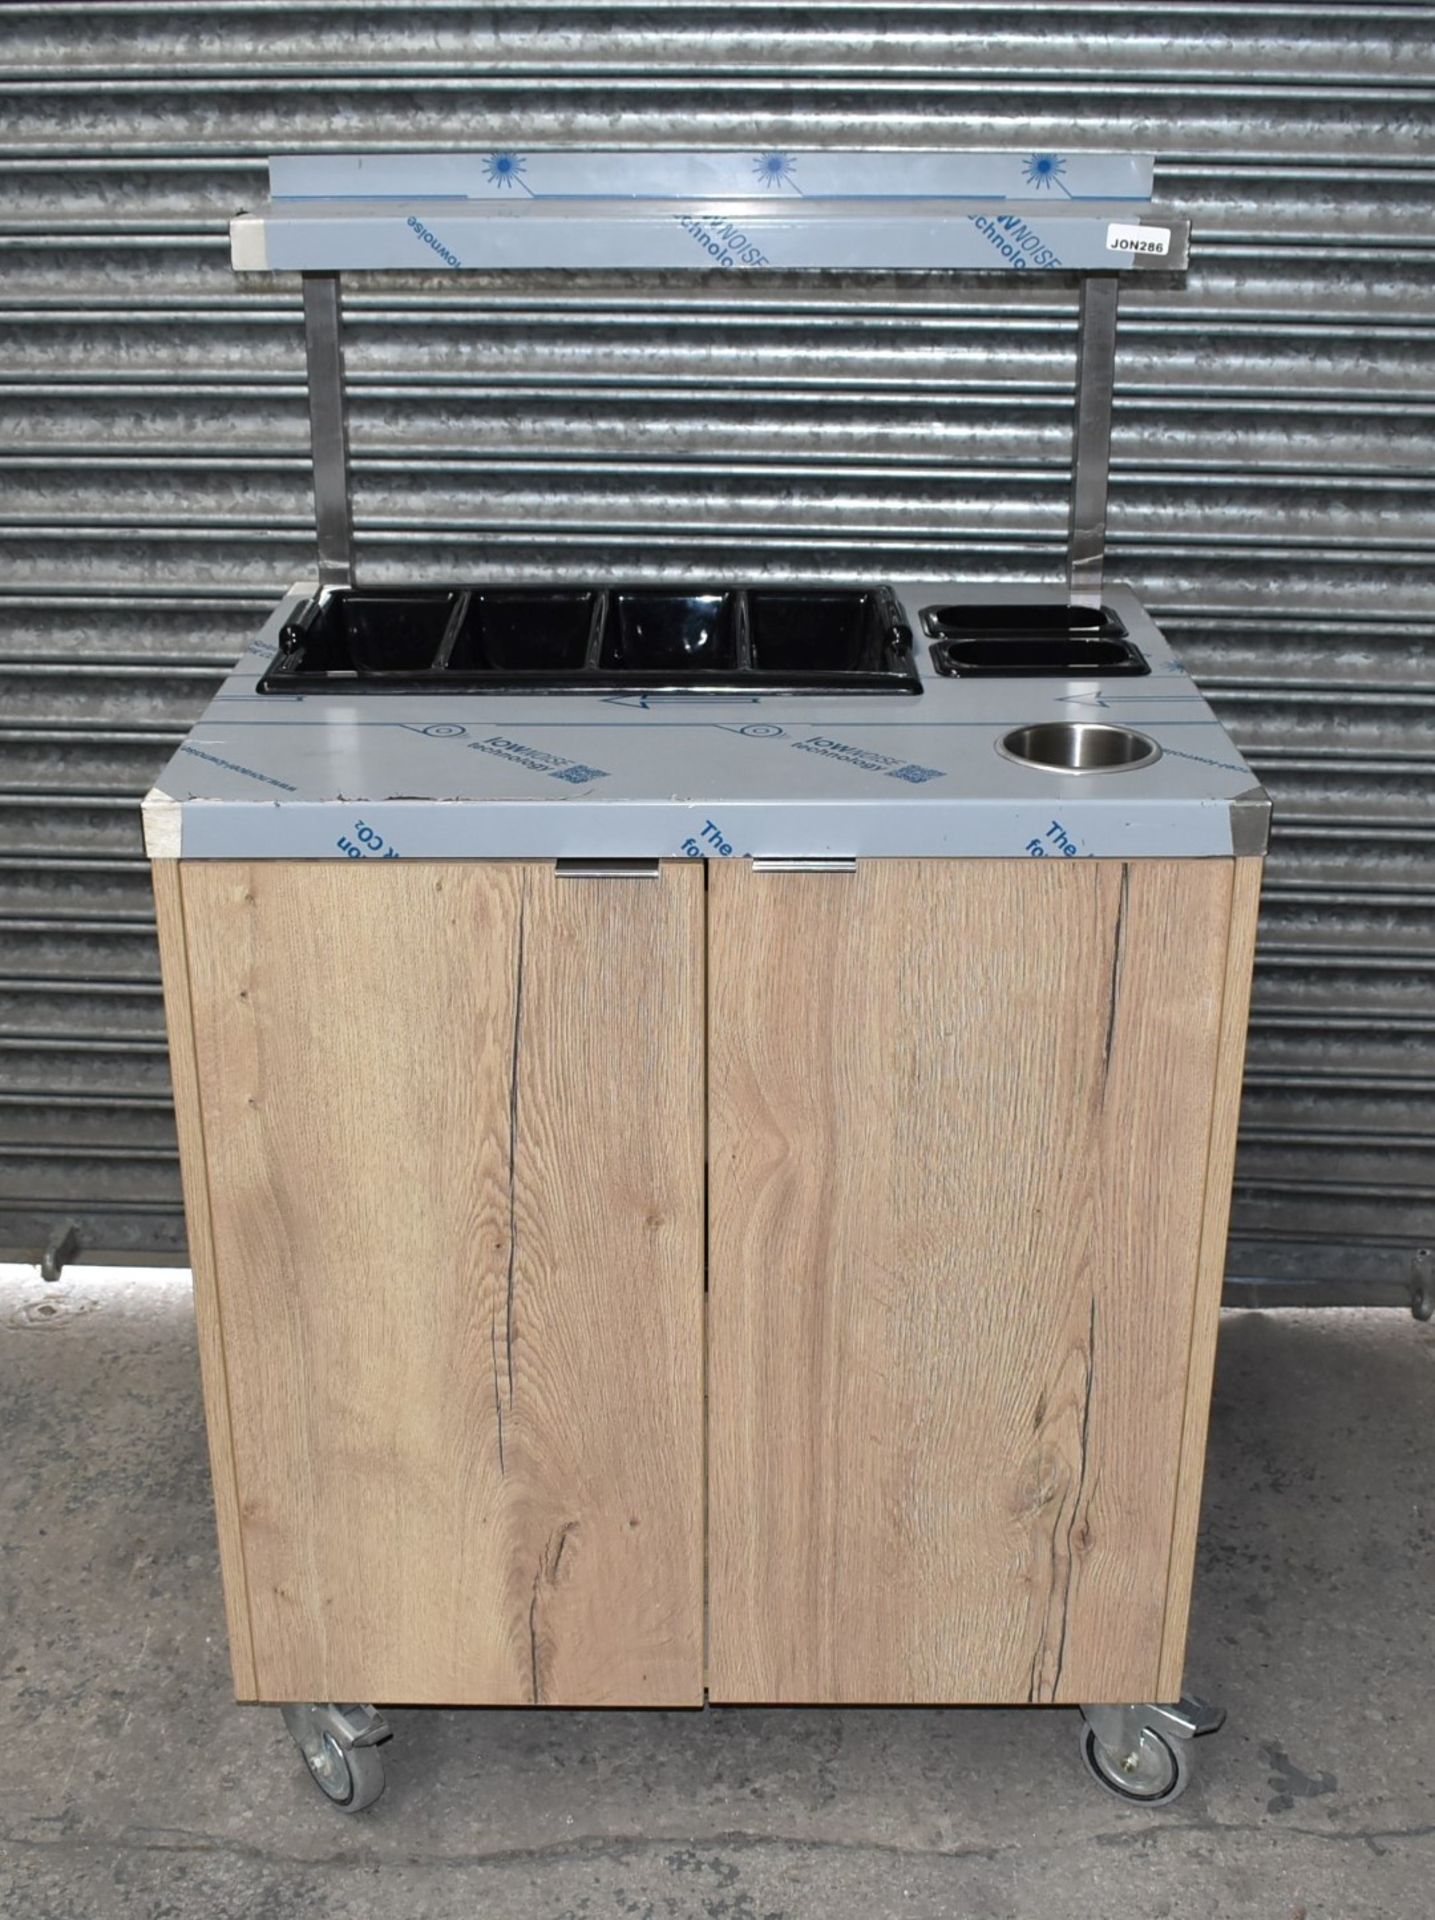 1 x Cutlery Service Trolley Featuring an Oak Cabinet With Internal Drawers, Stainless Steel - Image 6 of 13